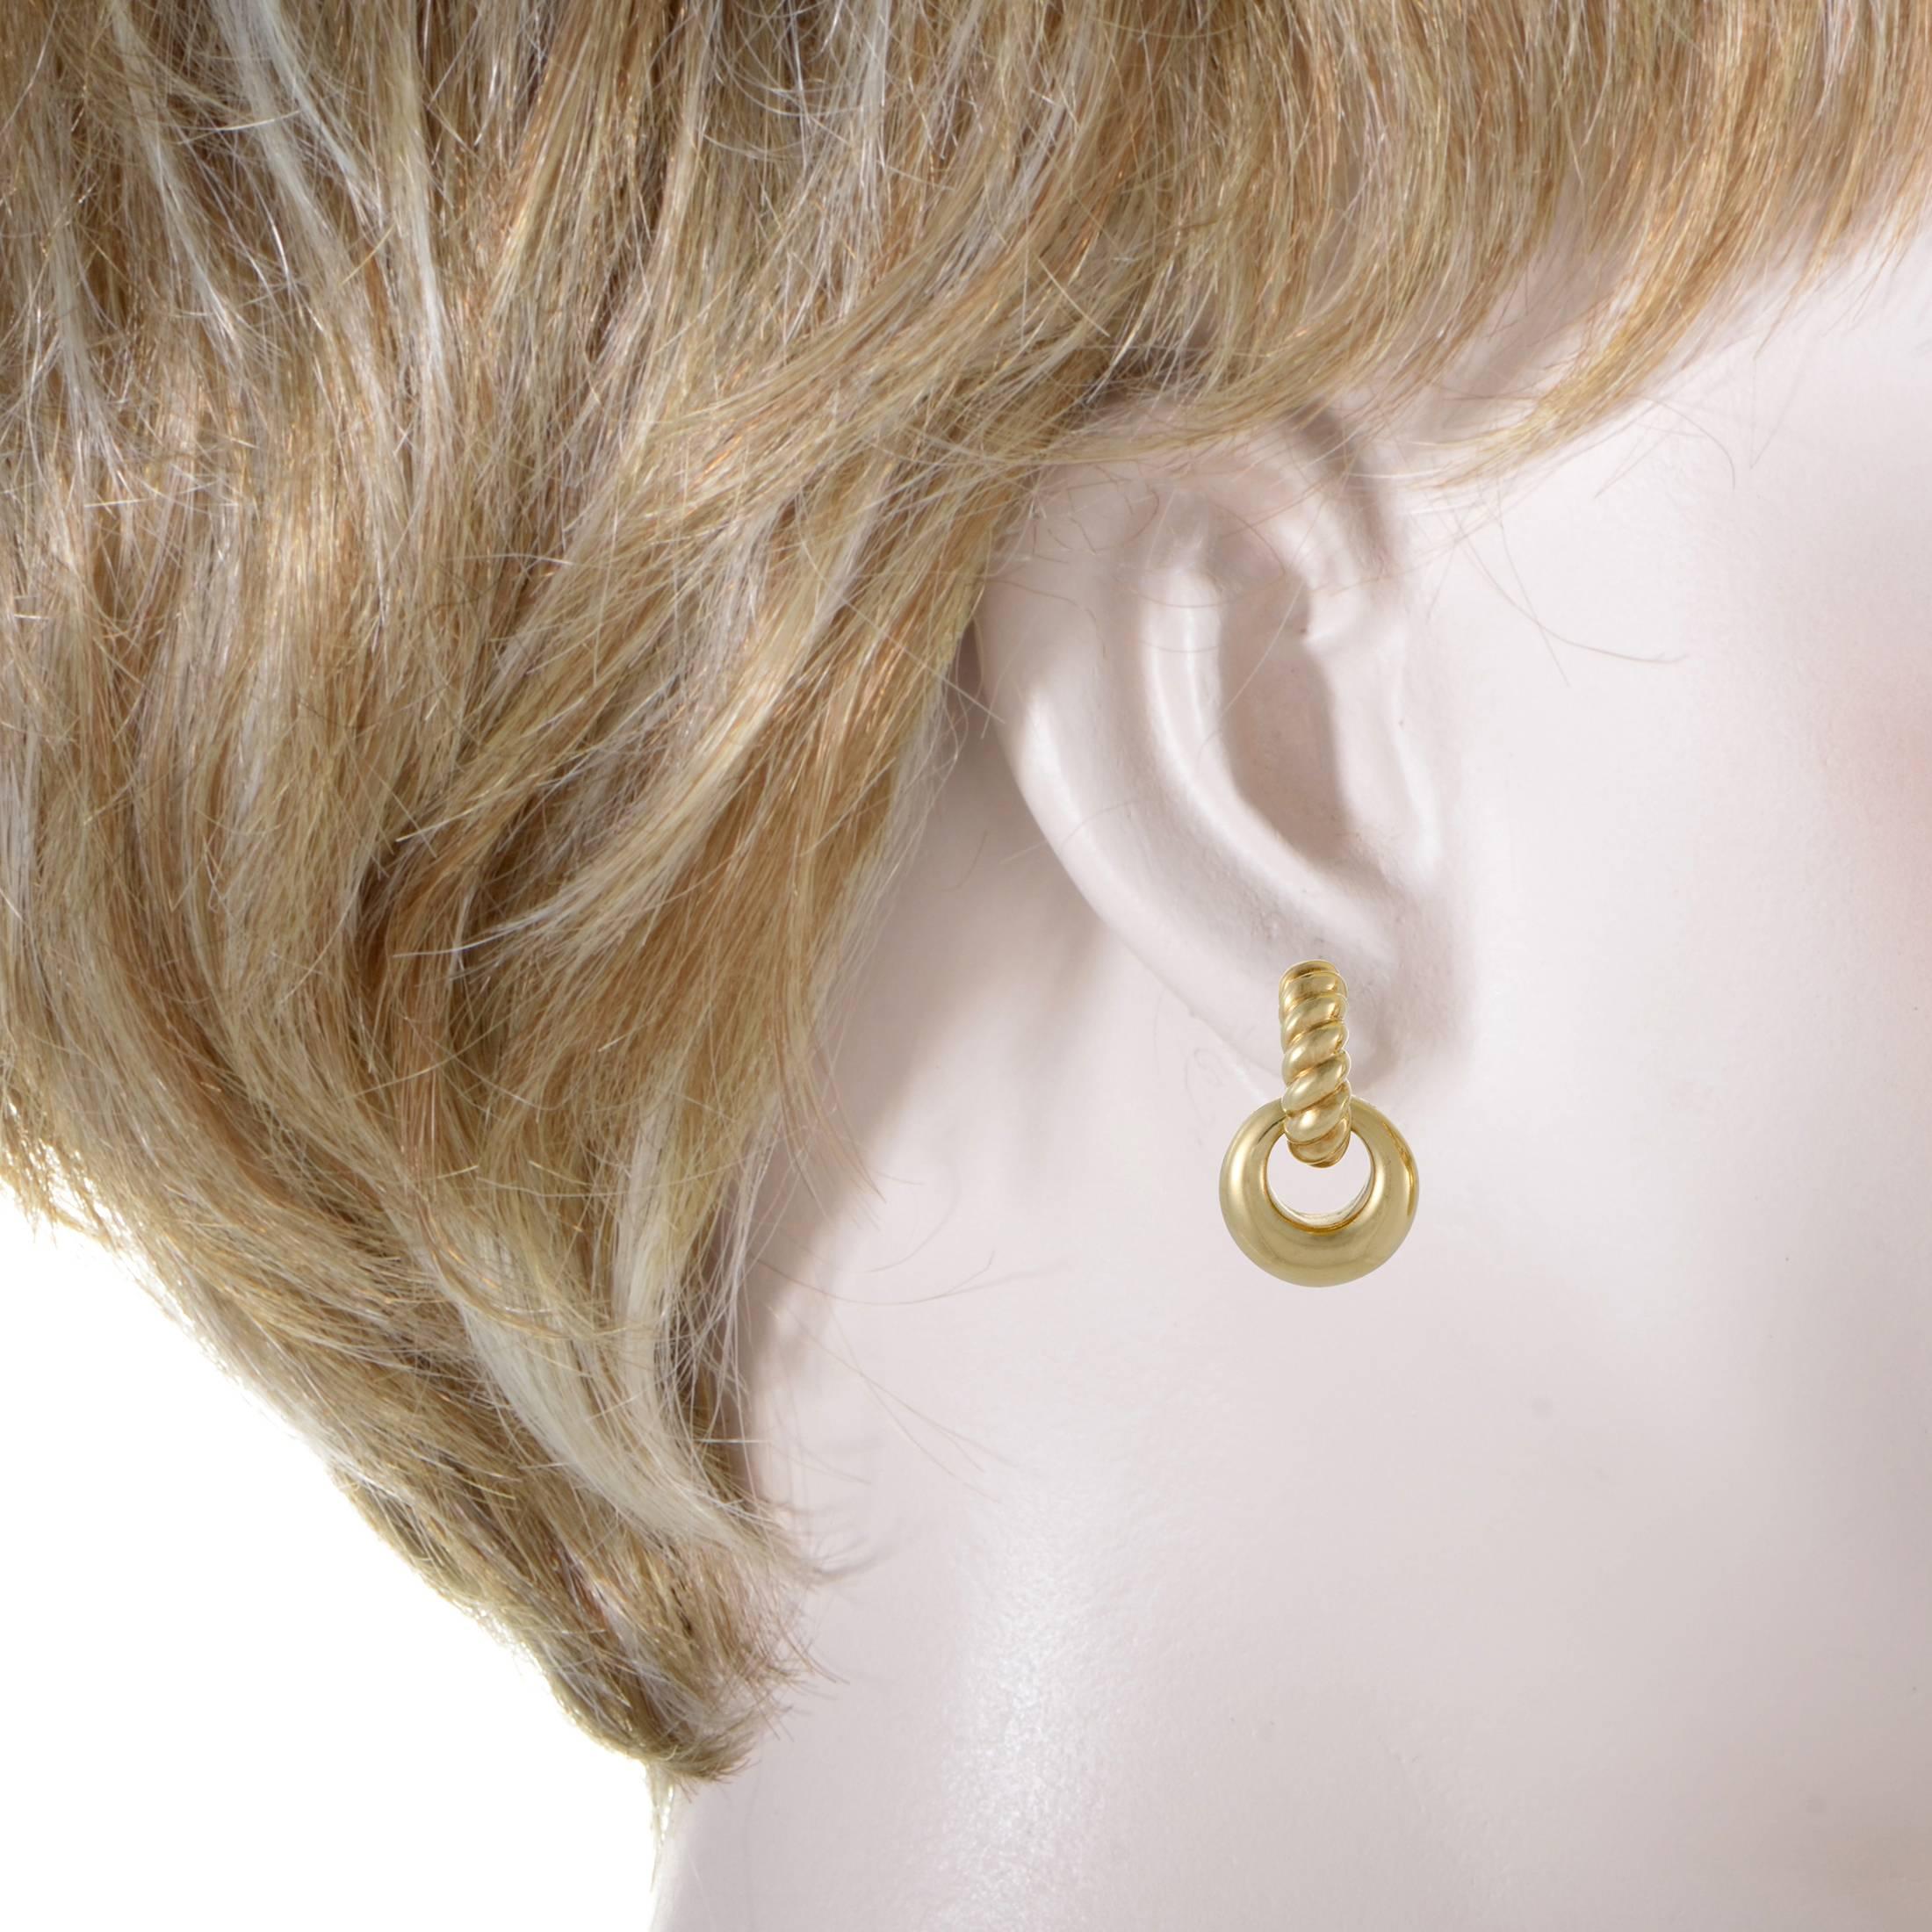 Made entirely of immaculately gleaming 18K yellow gold and boasting shapes that gracefully twist and flow to produce an enchanting allure, these gorgeous earrings from Pomellato offer a look of stylish elegance and excellence.